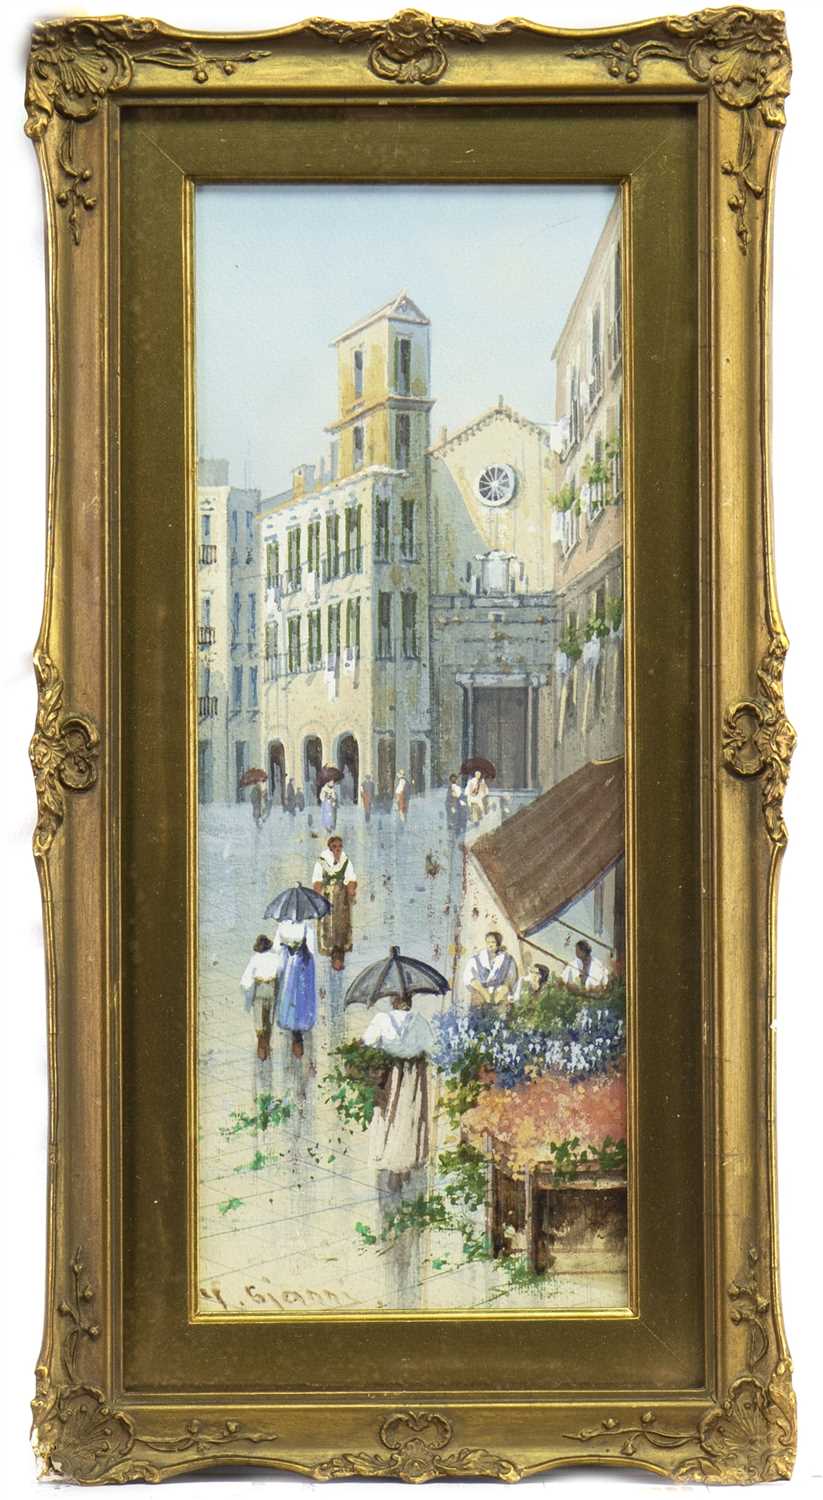 Lot 422 - CONTINENTAL STREET SCENE, A WATERCOLOUR BY GIANNI